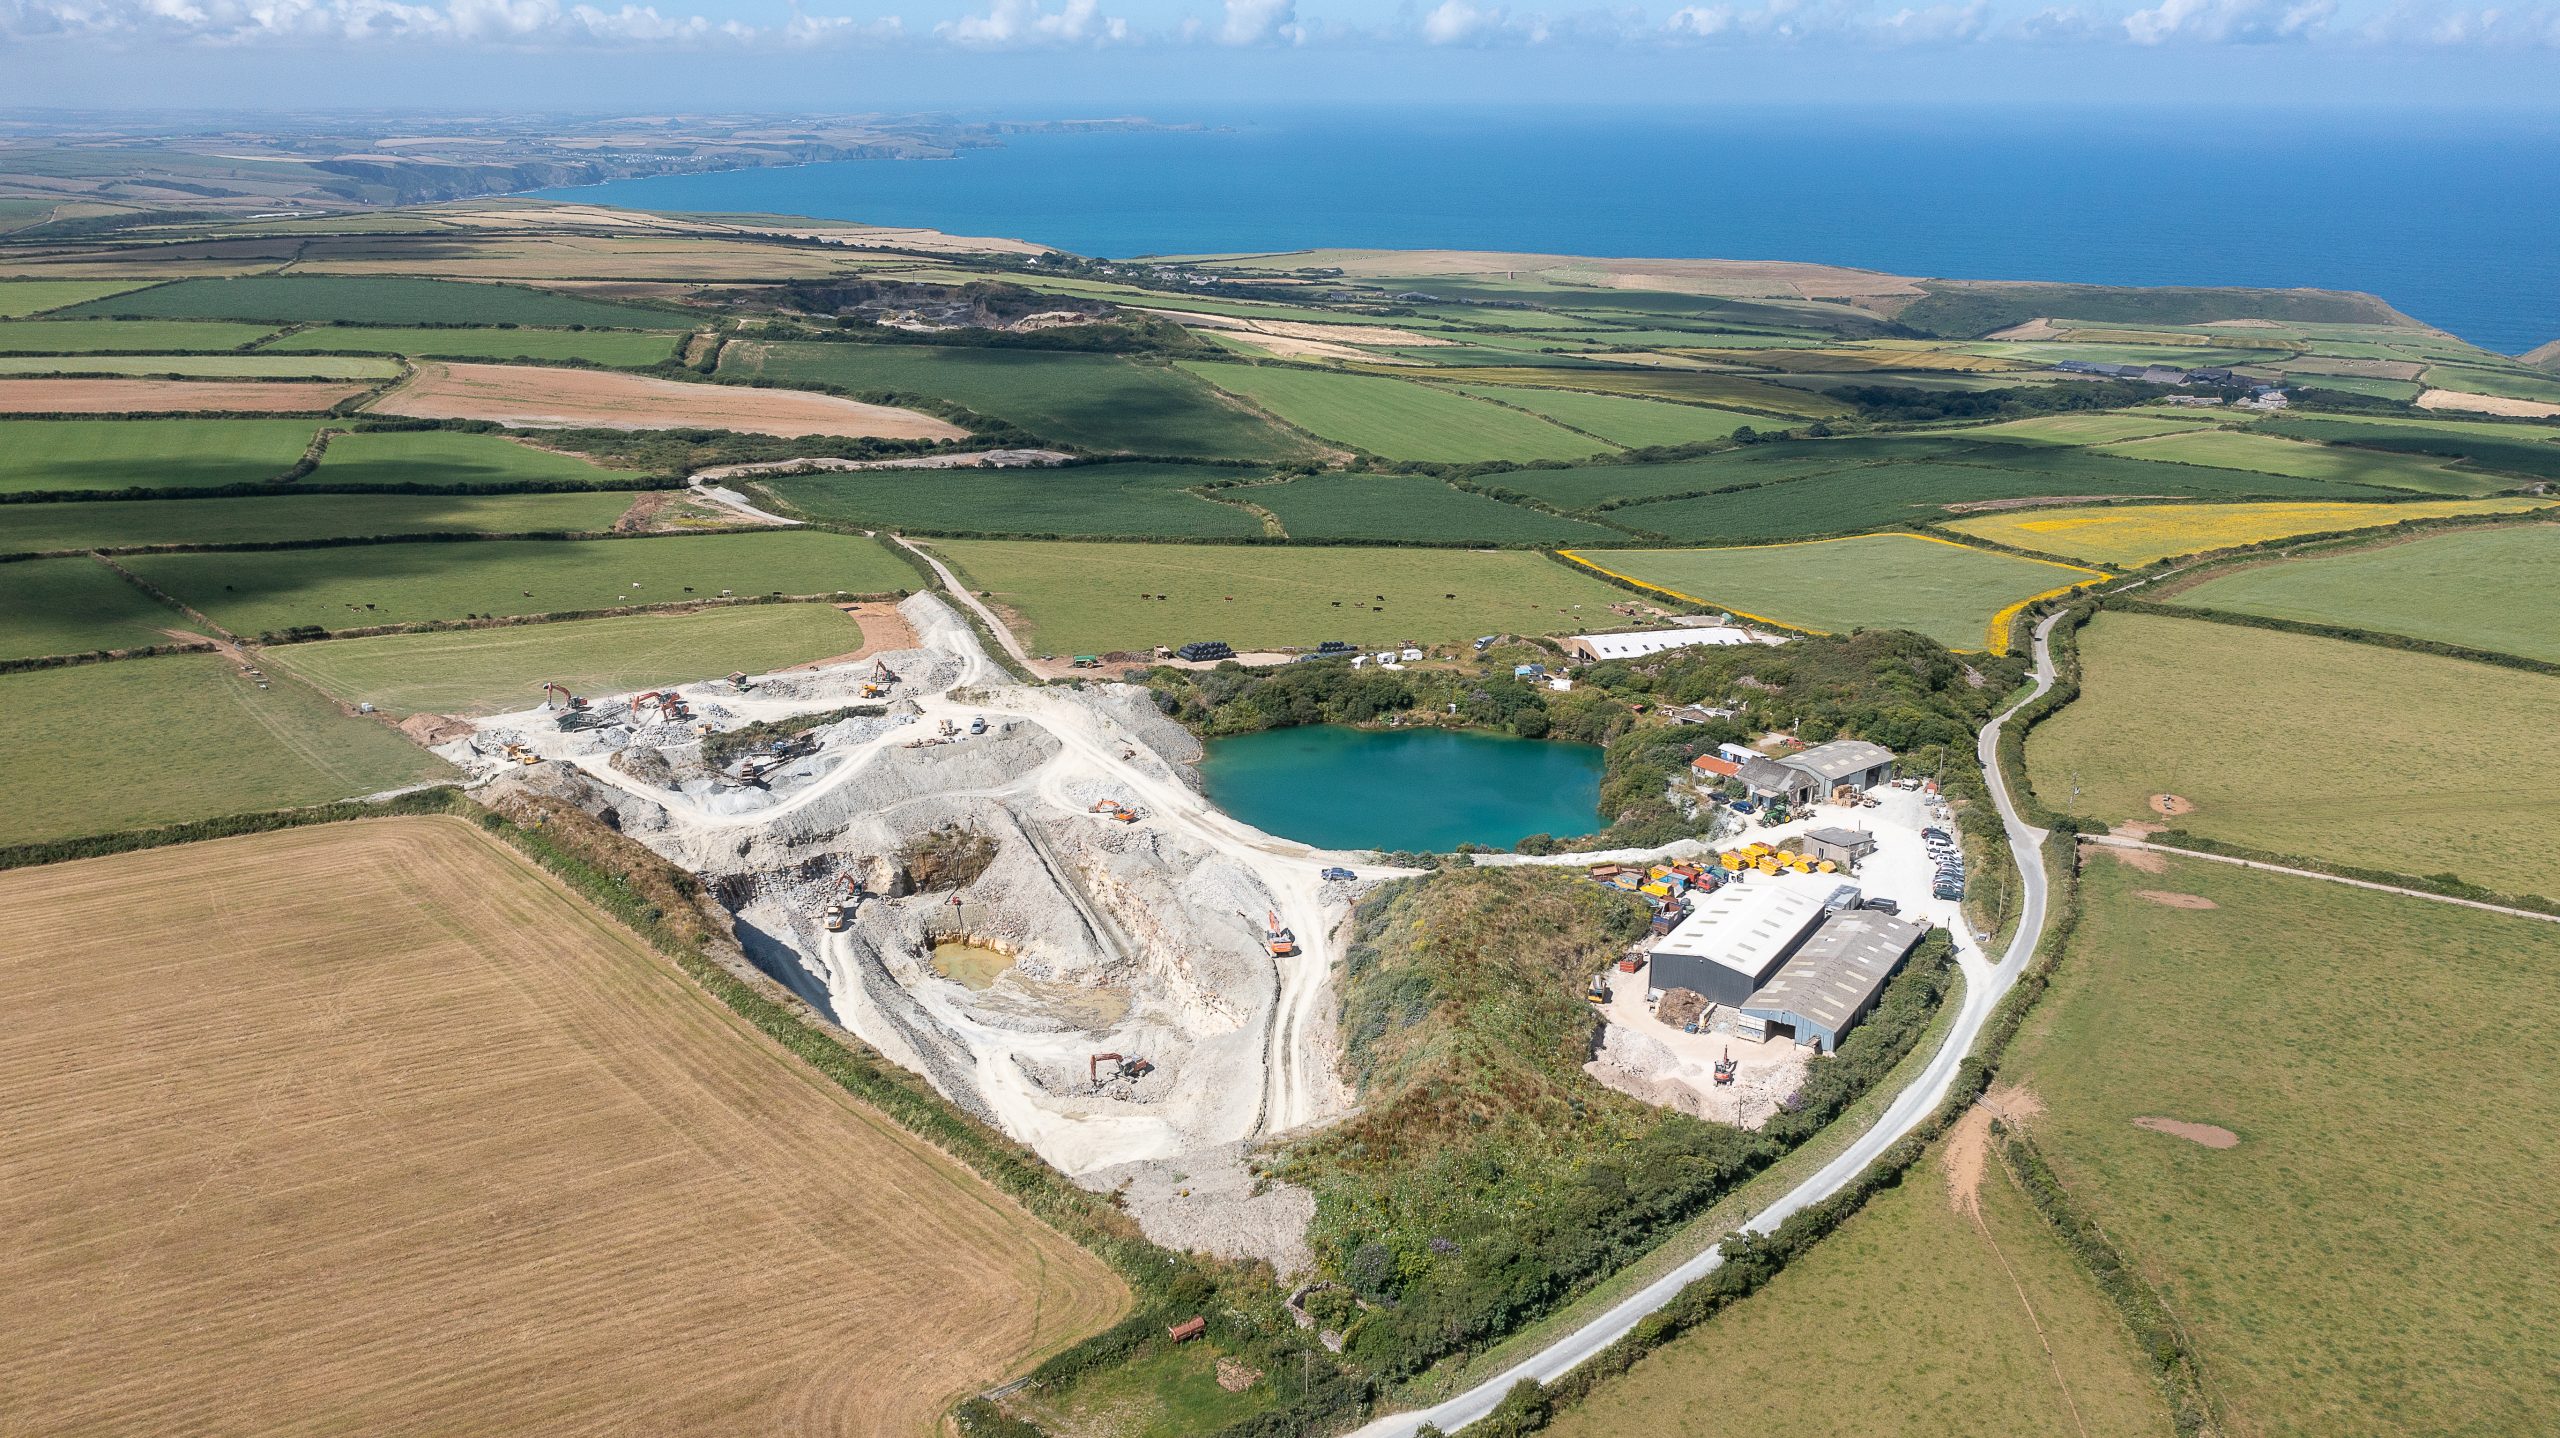 Trebarwith Quarry, part of RTC Quarries based in Cornwall and Devon